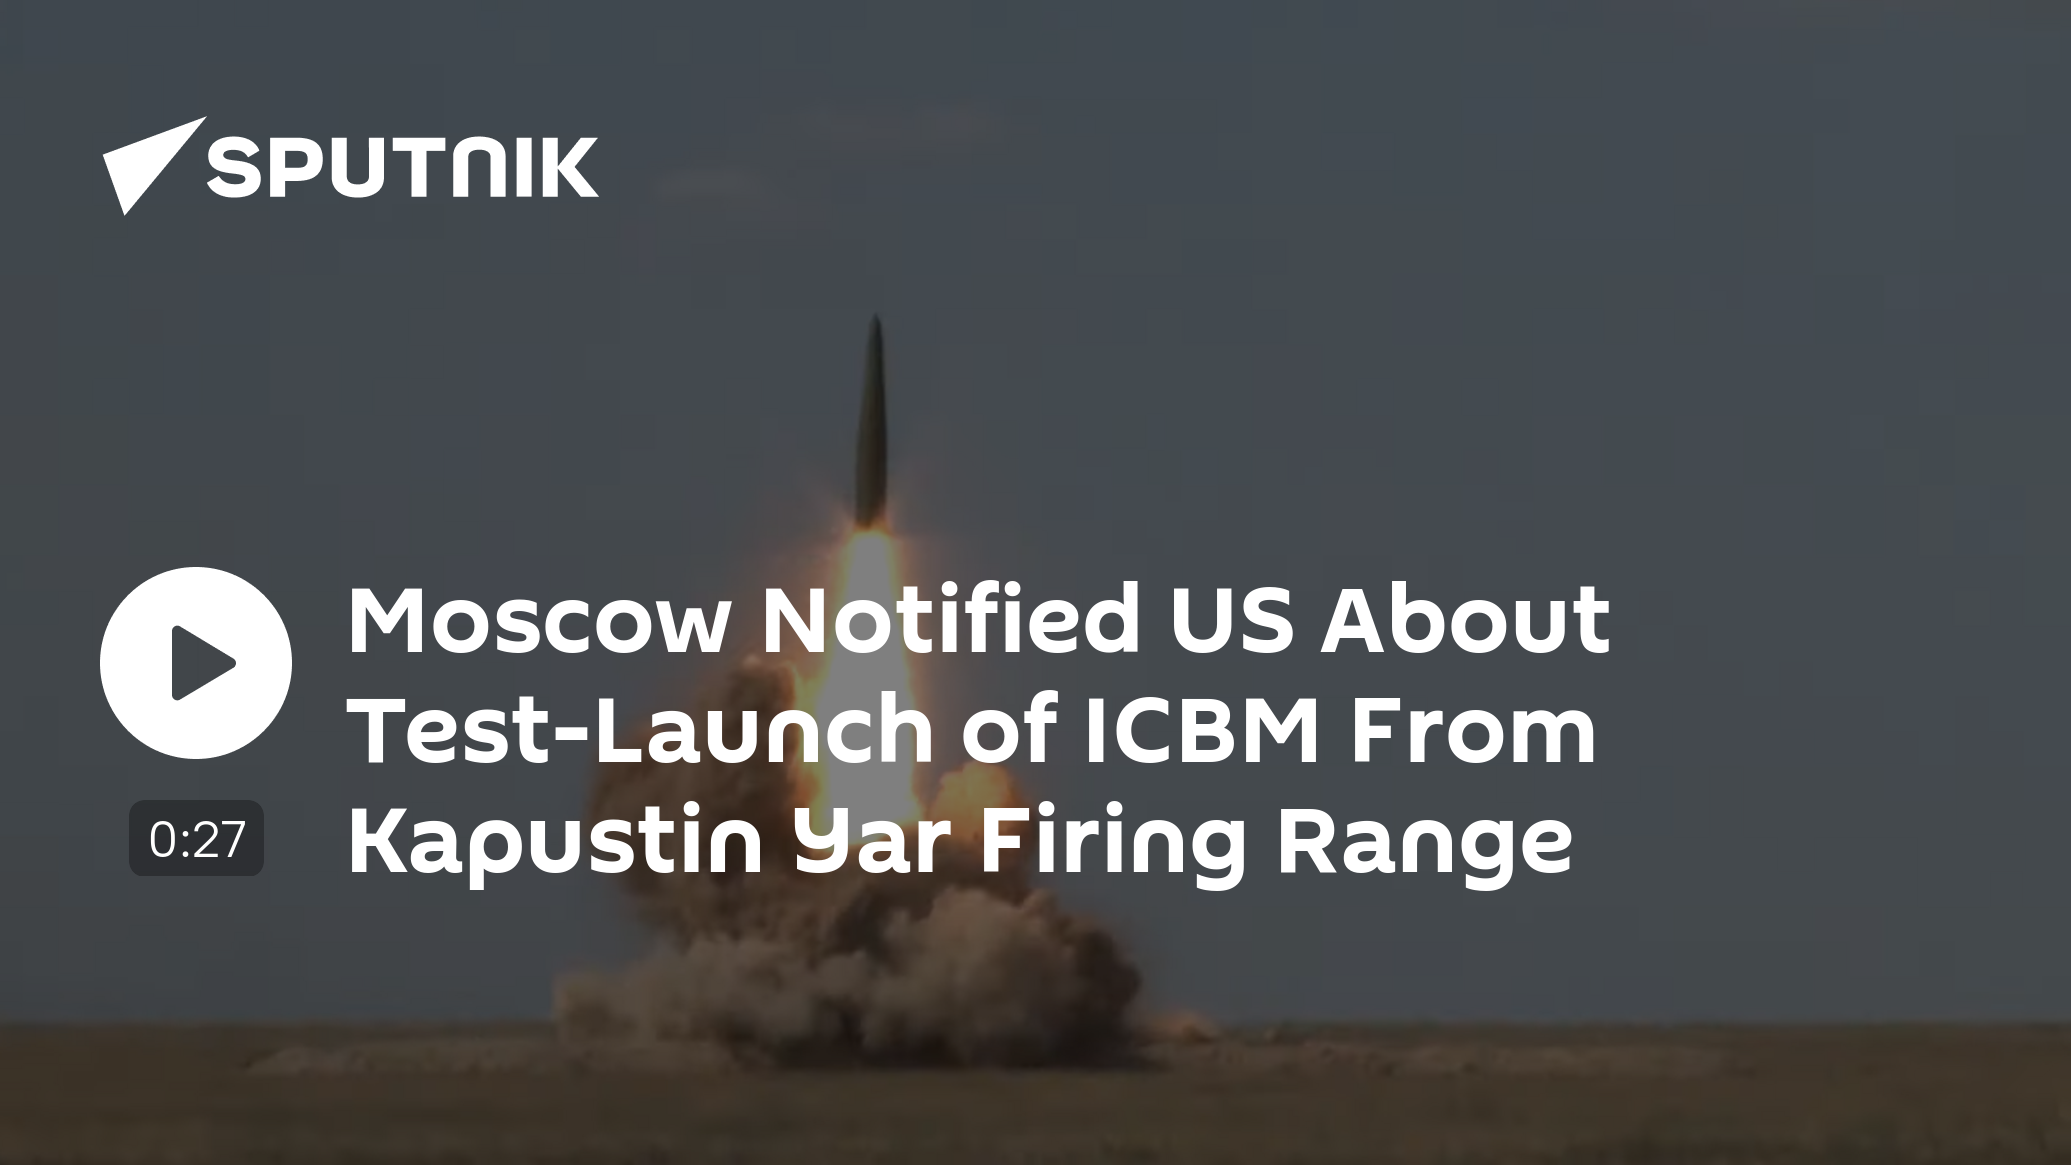 Moscow Notified US About Test-Launch of ICBM From Kapustin Yar Firing Range